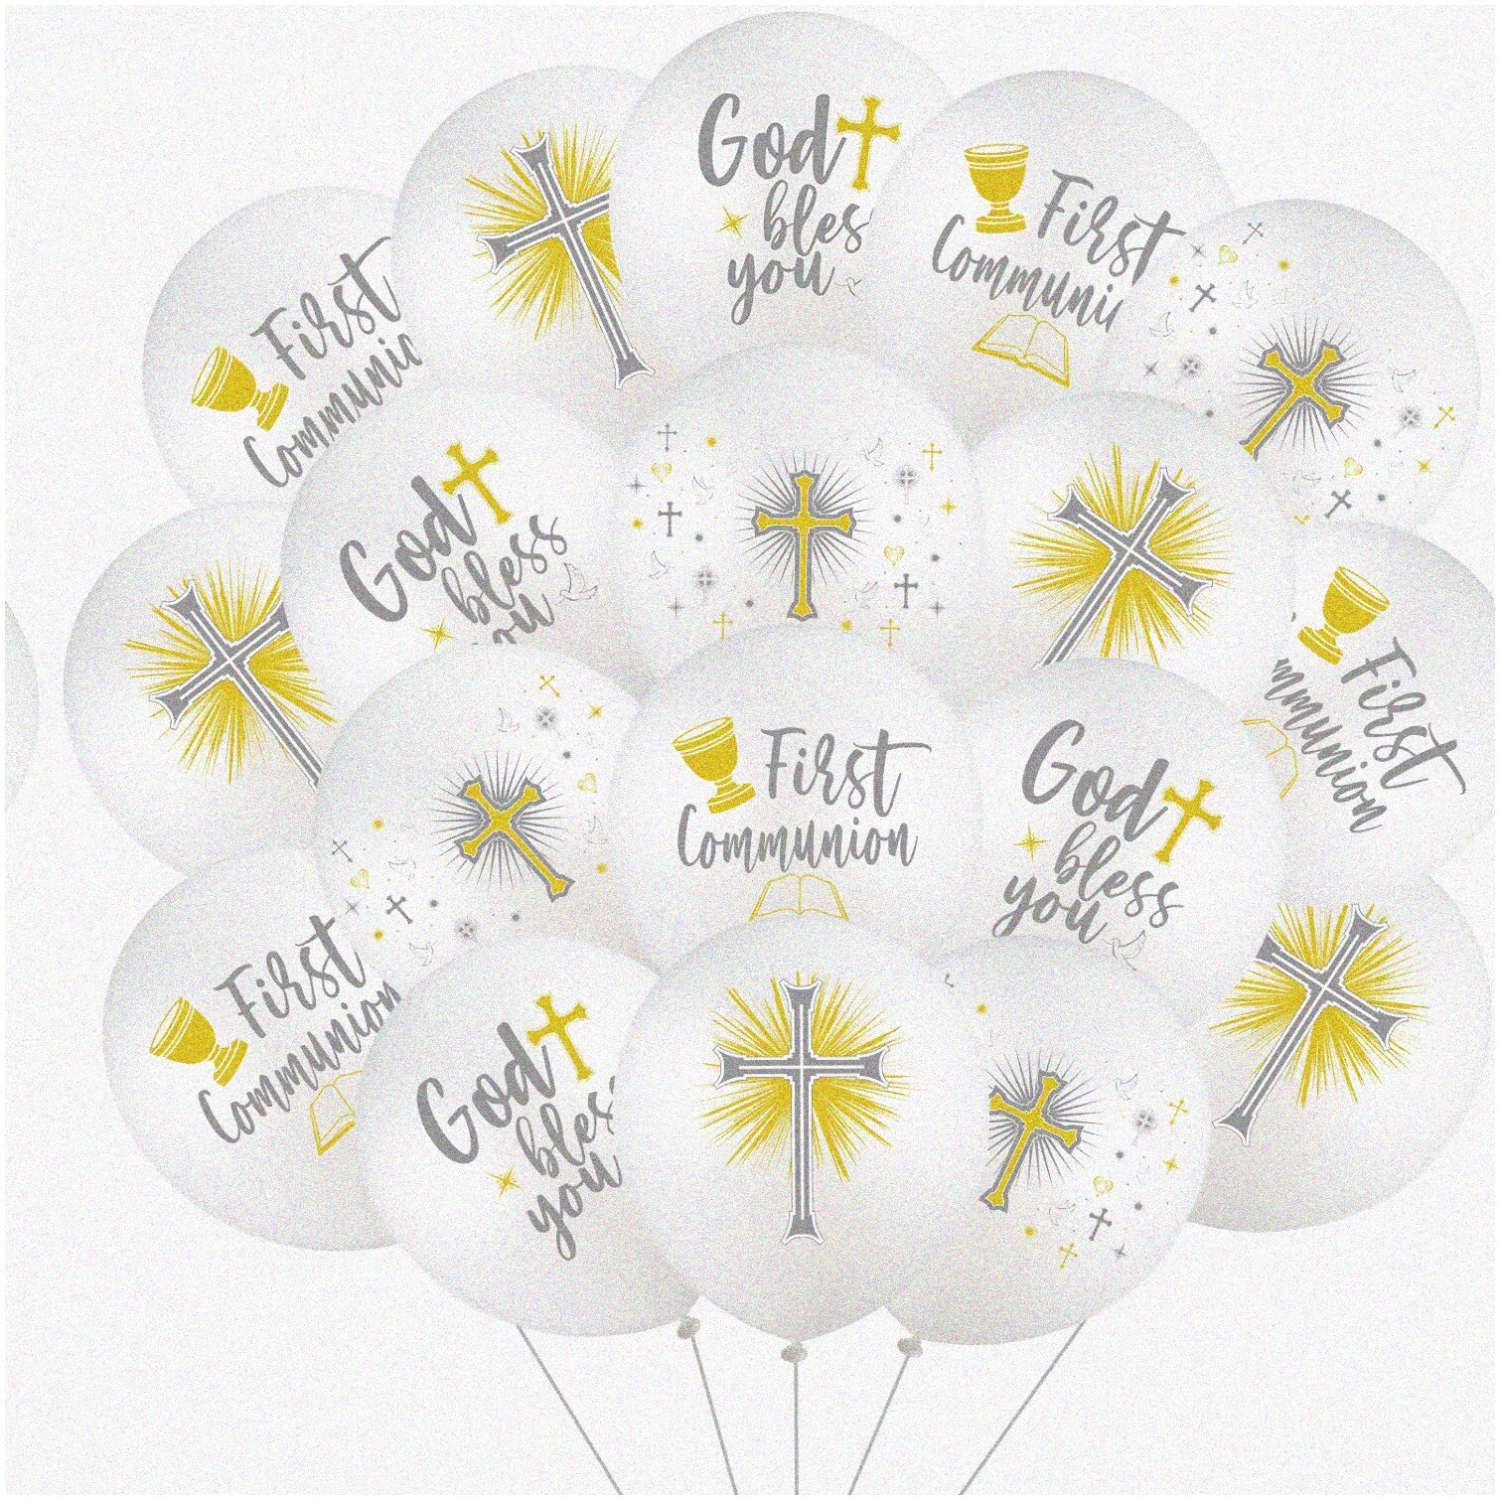 Blessed Moments Balloon Set: 48 Cross Doves & Chalice Latex Balloons - Perfect for Baptism, First Communion, Christening, Confirmation Decorations & Supplies - God Bless You!